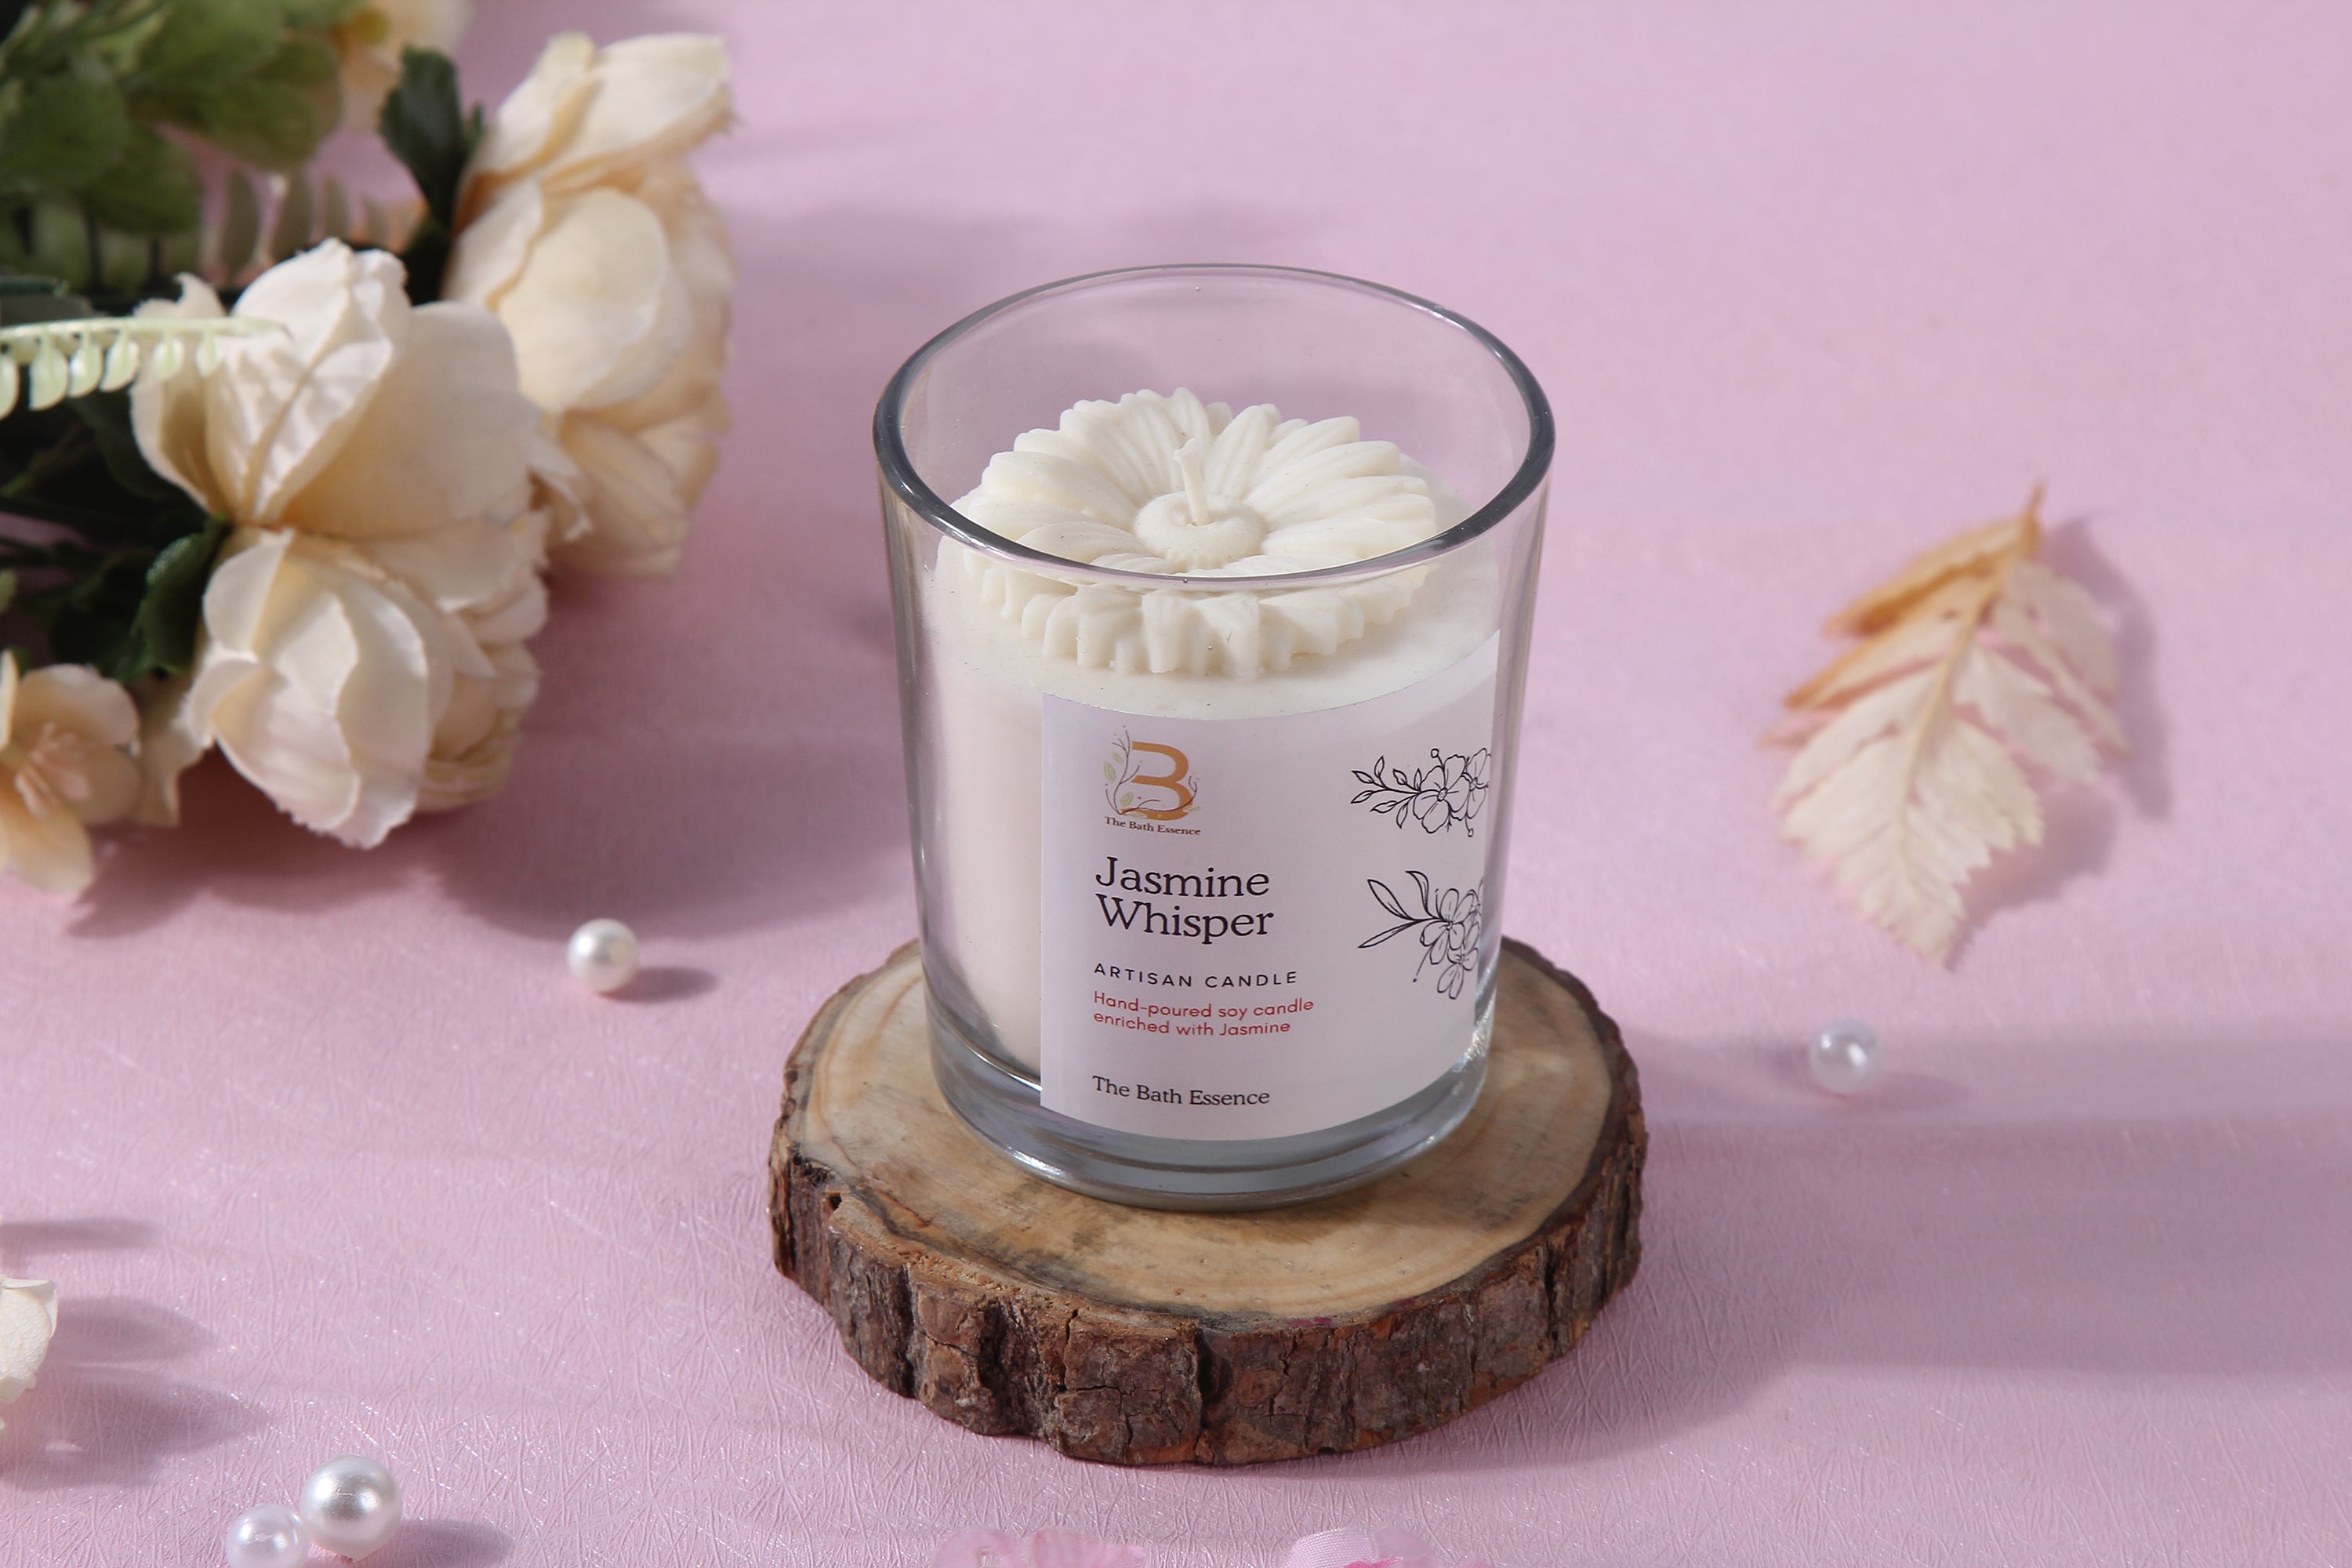 Jasmine Whisper Soy Scented Candle The Bath Essence